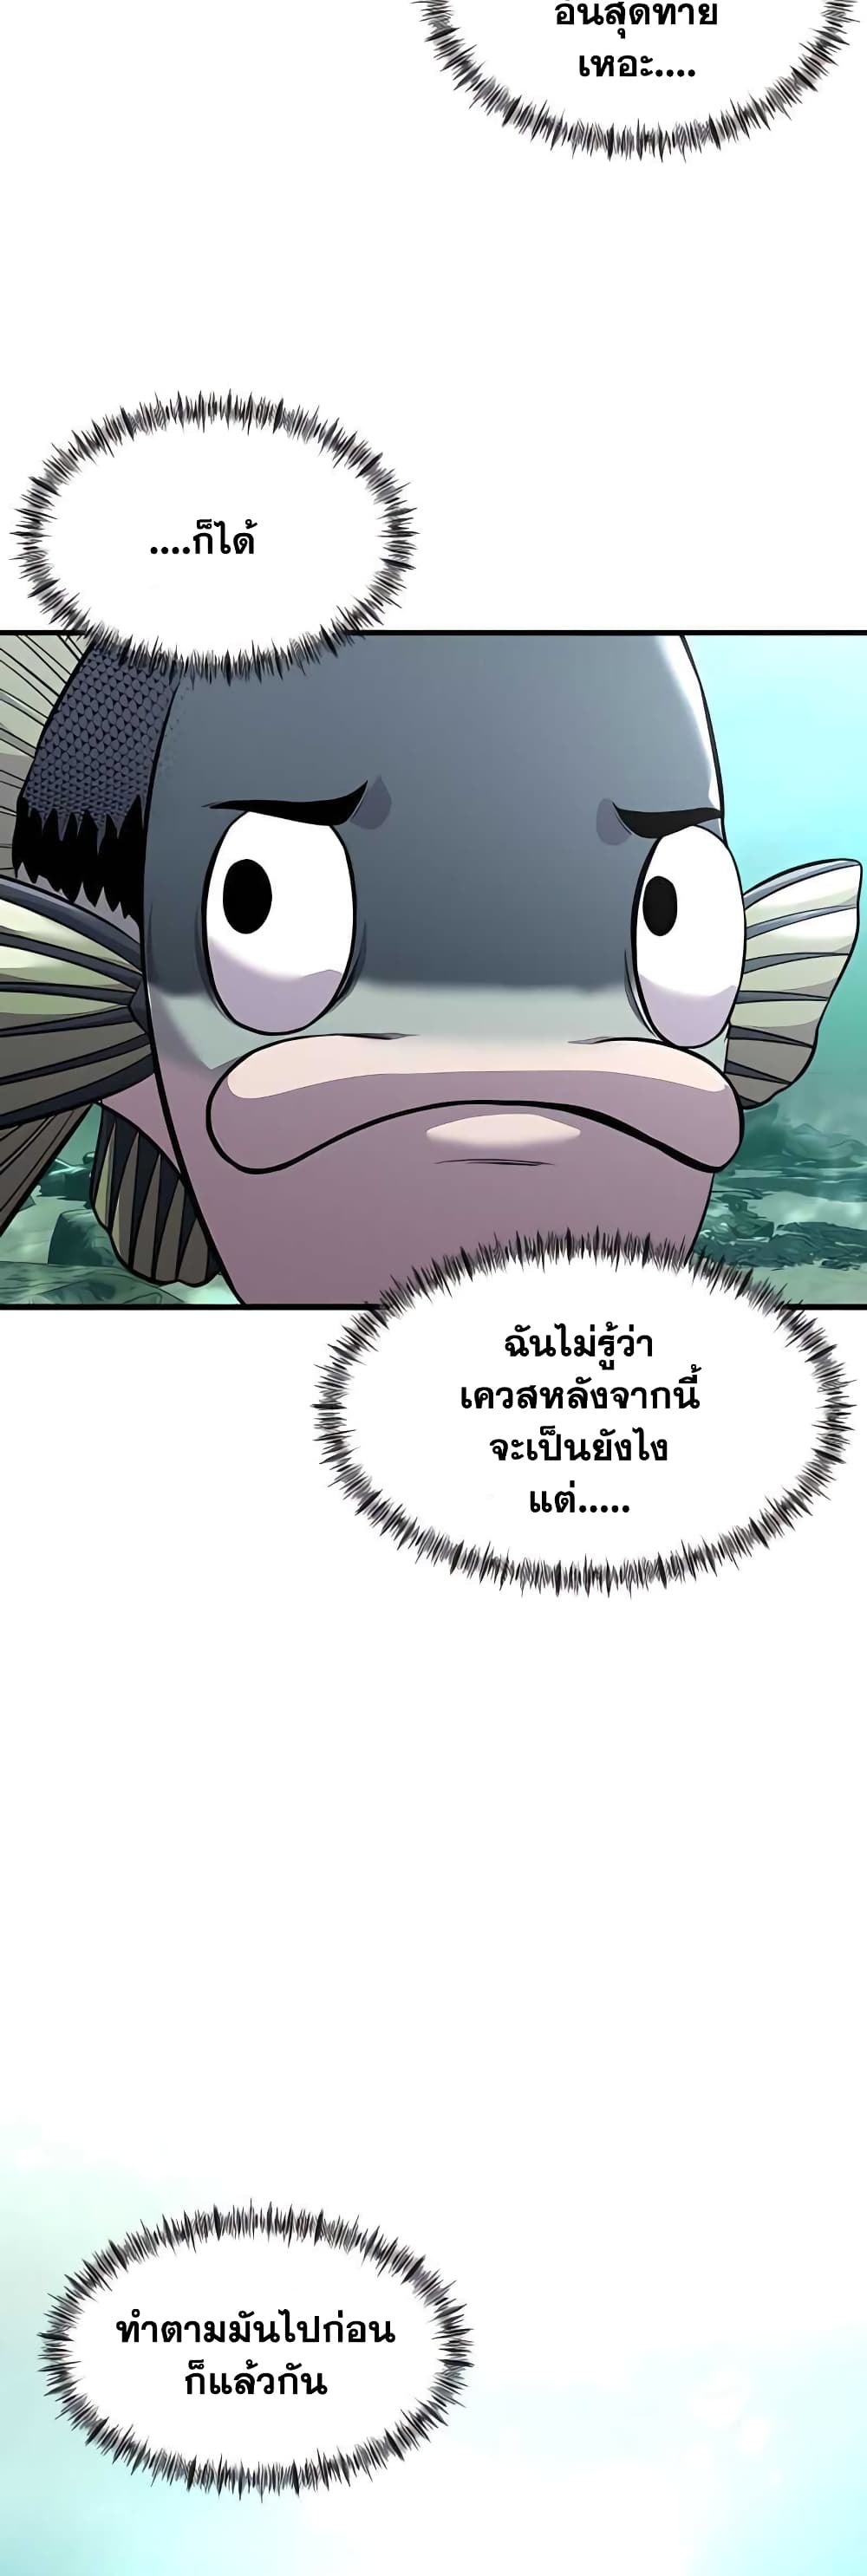 Surviving As a Fish ตอนที่ 4 (17)